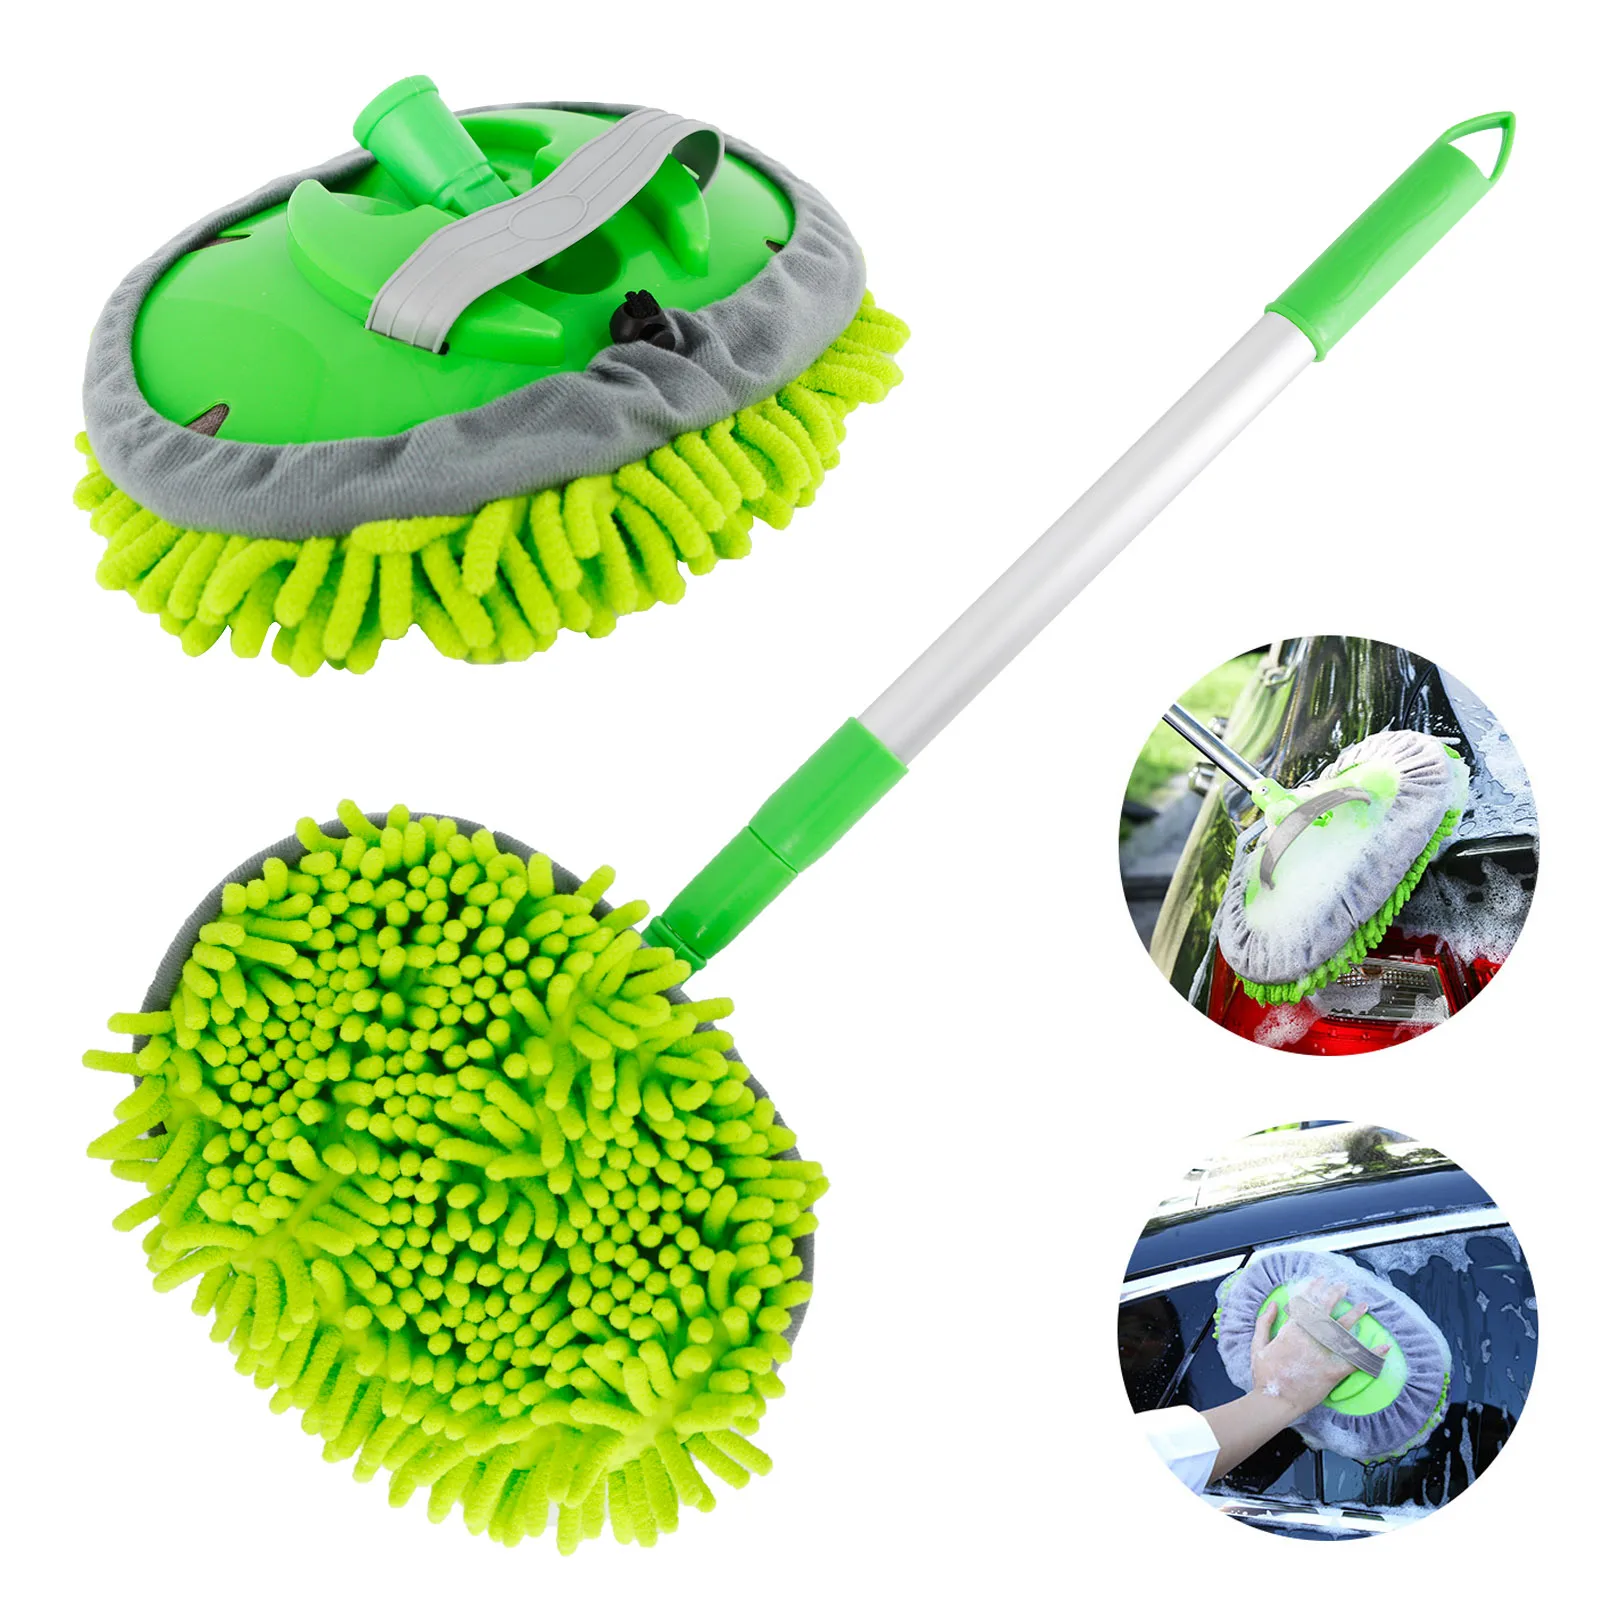 

New 2021 Upgrade 2 in 1 Three Section Telescoping Long Handle Car Wash Brush Mop Thick Chenille Microfiber Broom Cleaning Tool